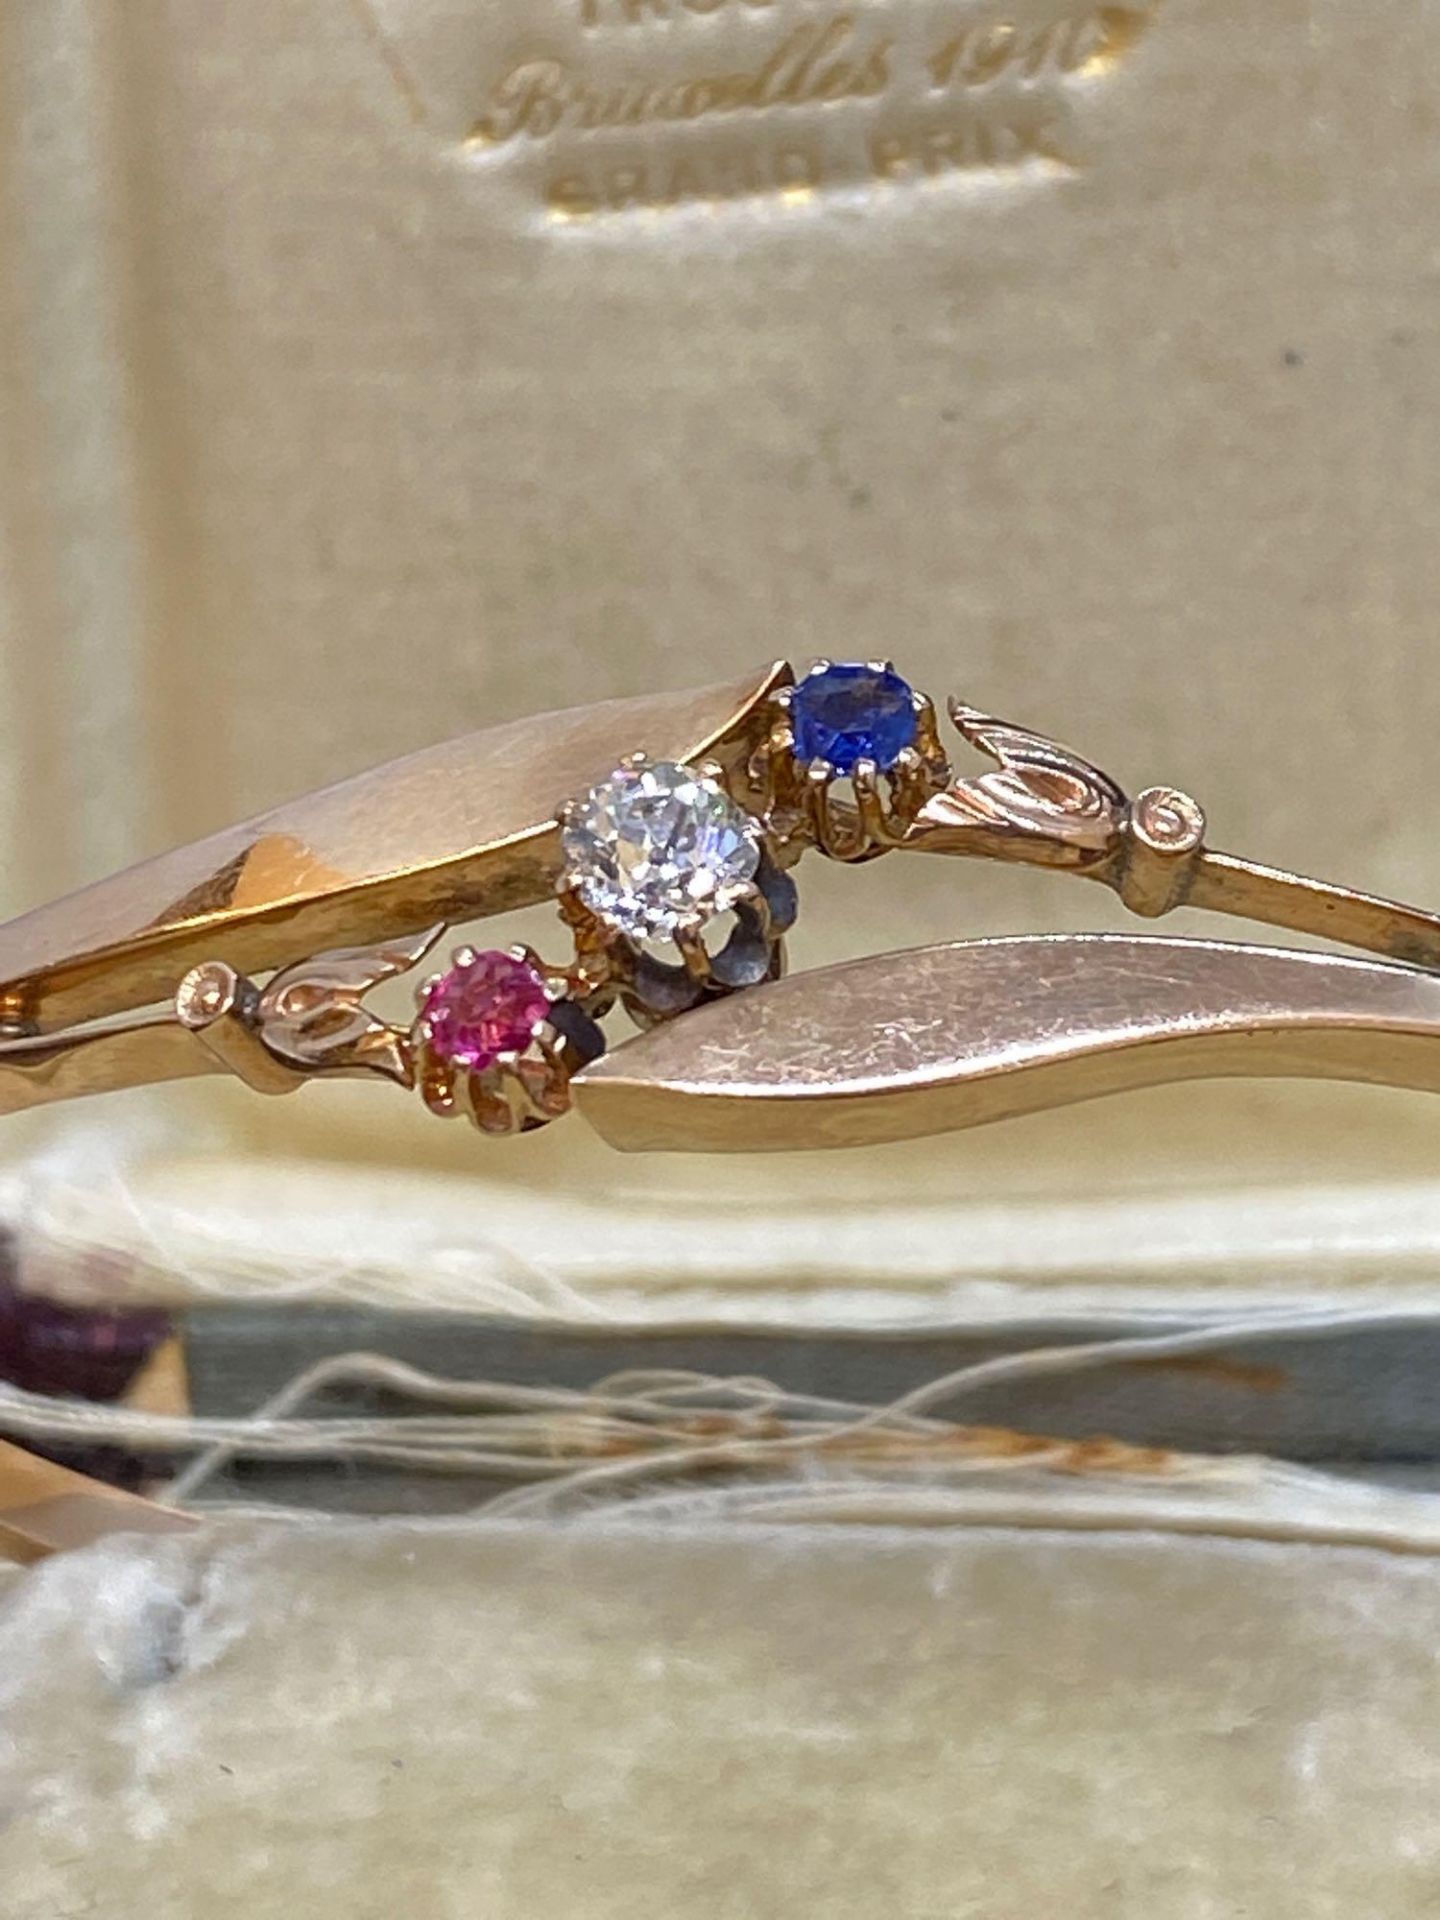 Antique Rose Gold Hinged Bangle Set with Sapphire, Diamond and Ruby - 7.3 Grams